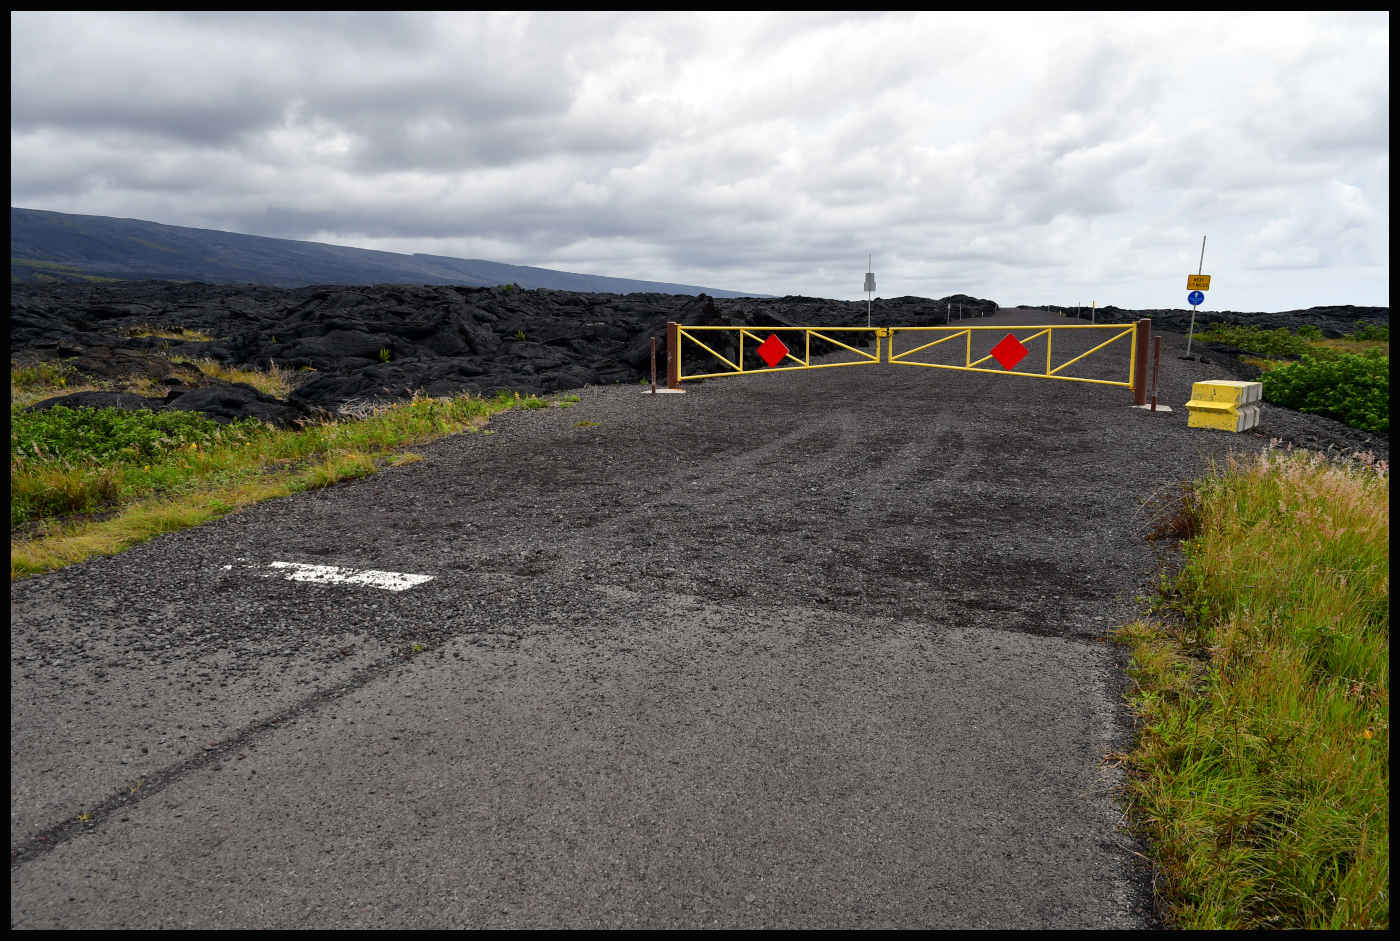 Chain of Craters Rd - Cerrada